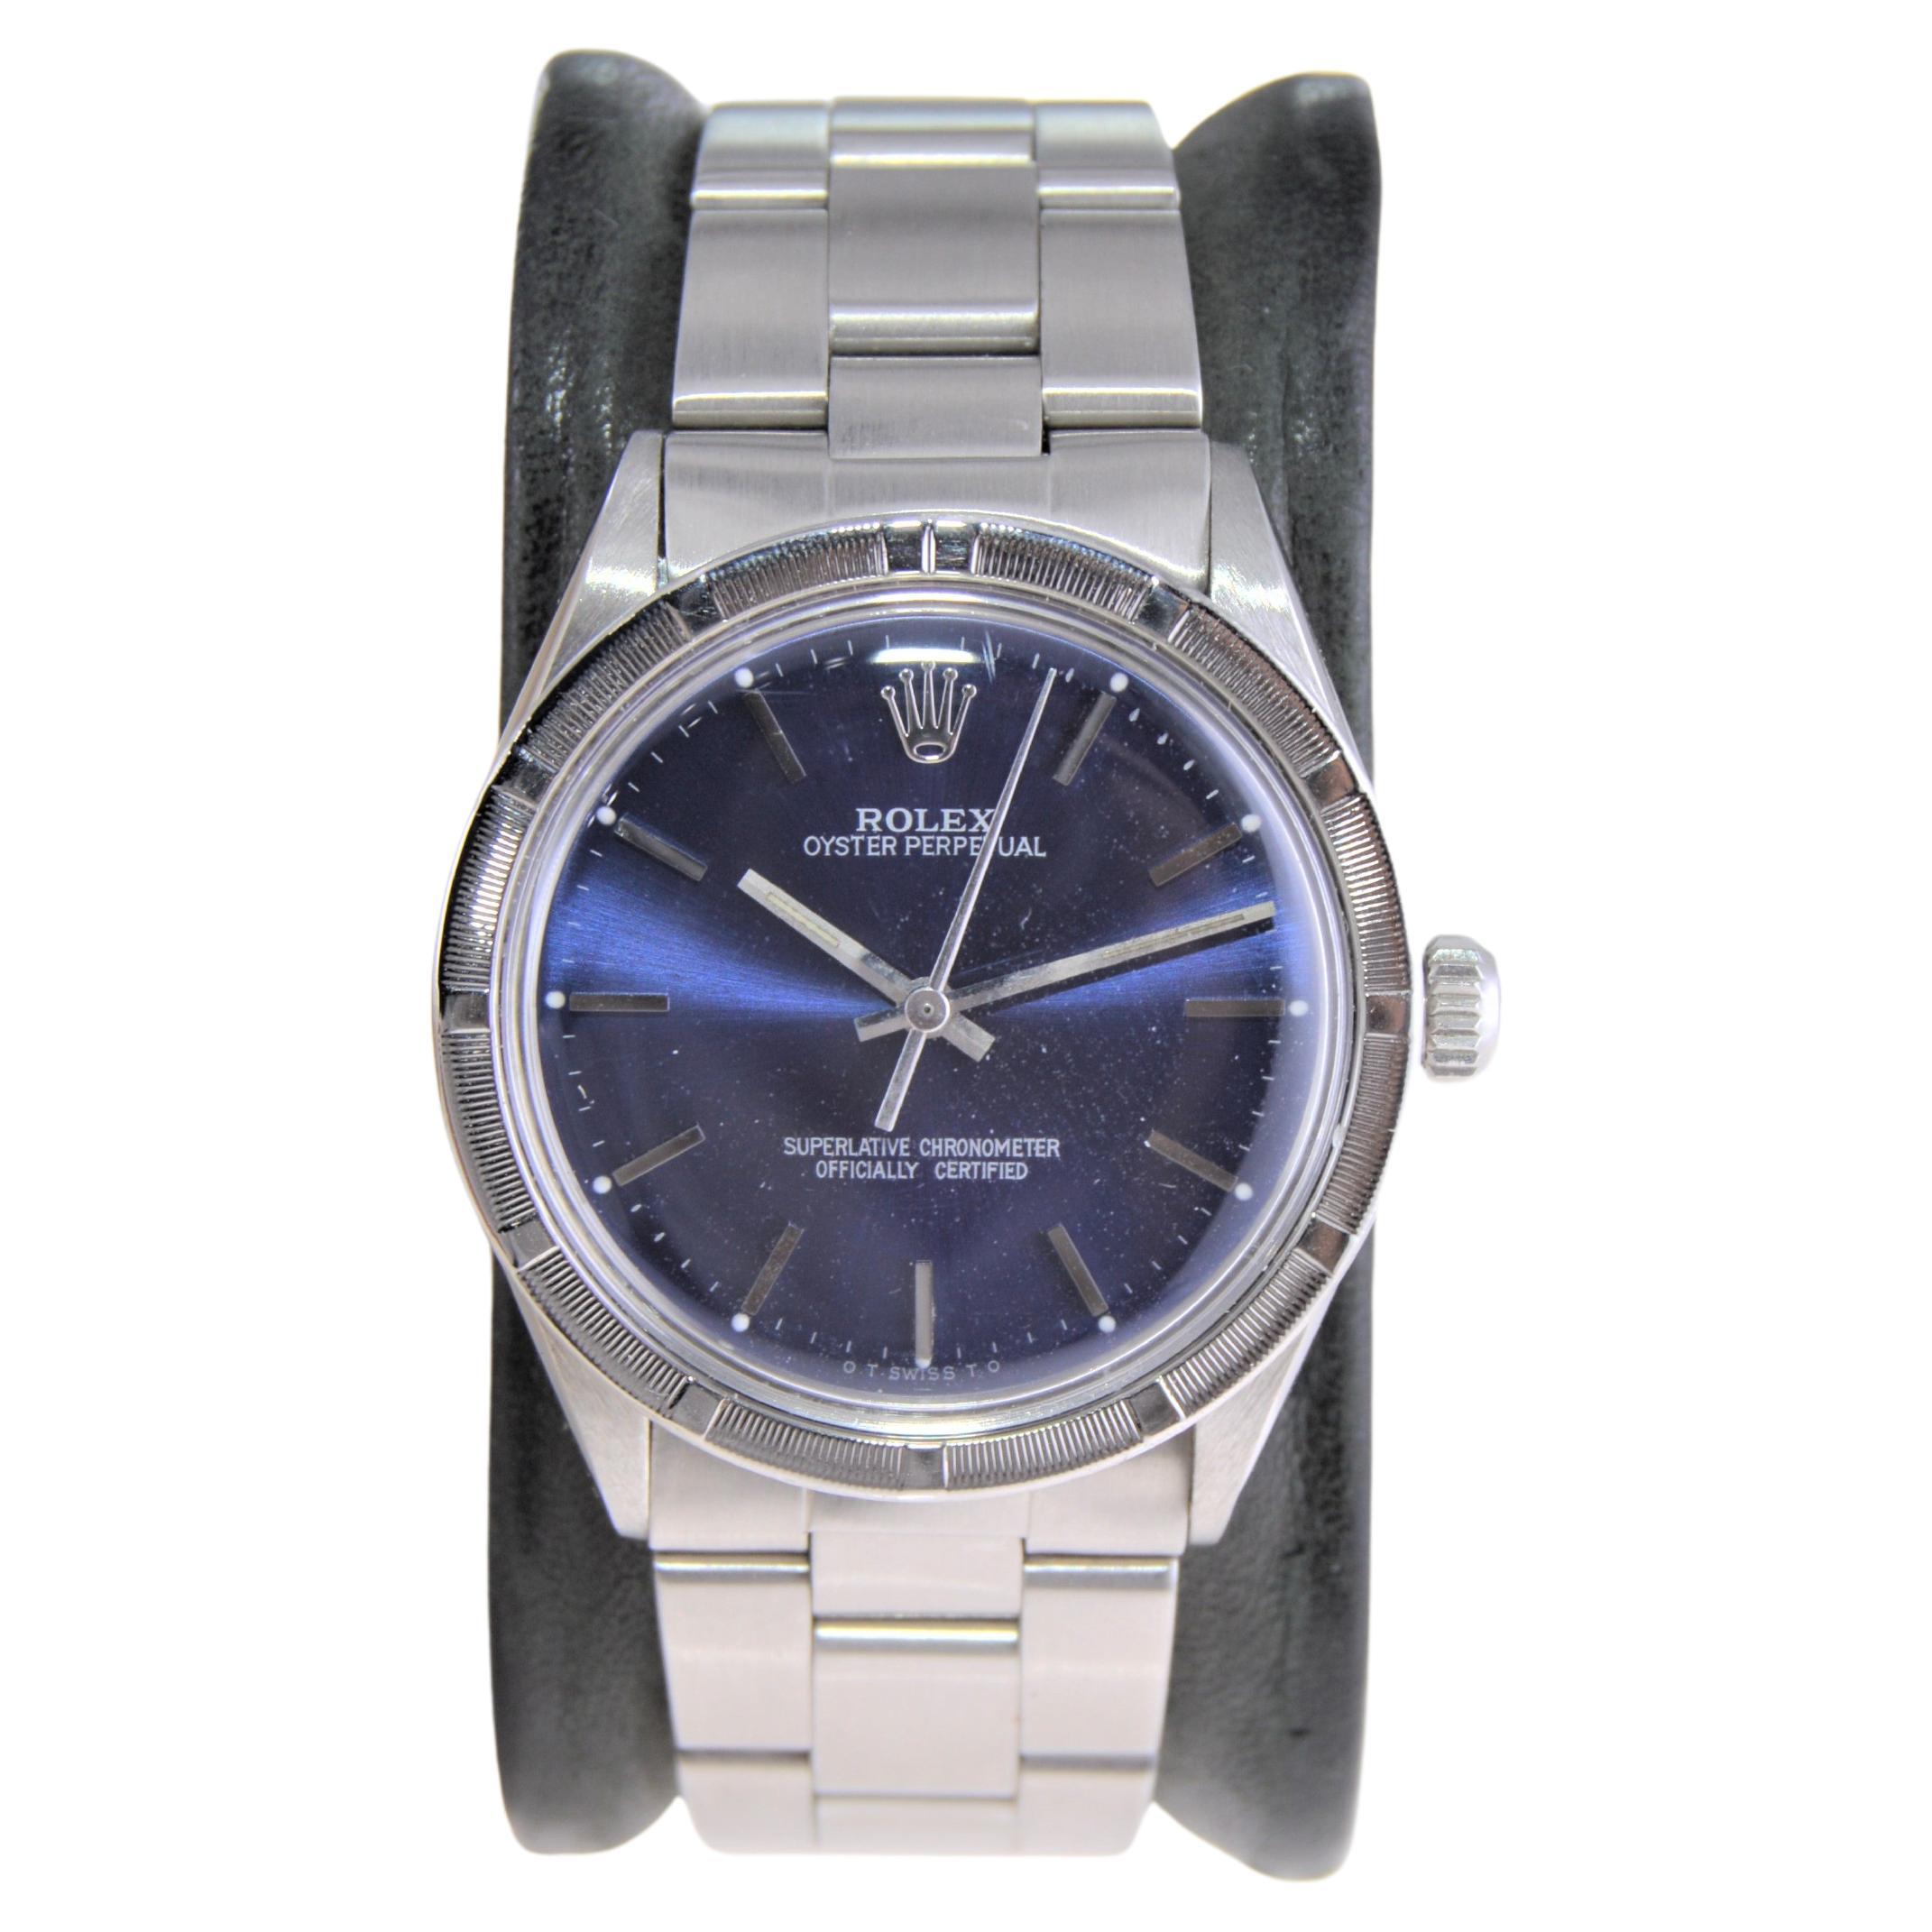 Modern Rolex Stainless Steel Oyster Perpetual with Original Riveted Oyster Bracelet 